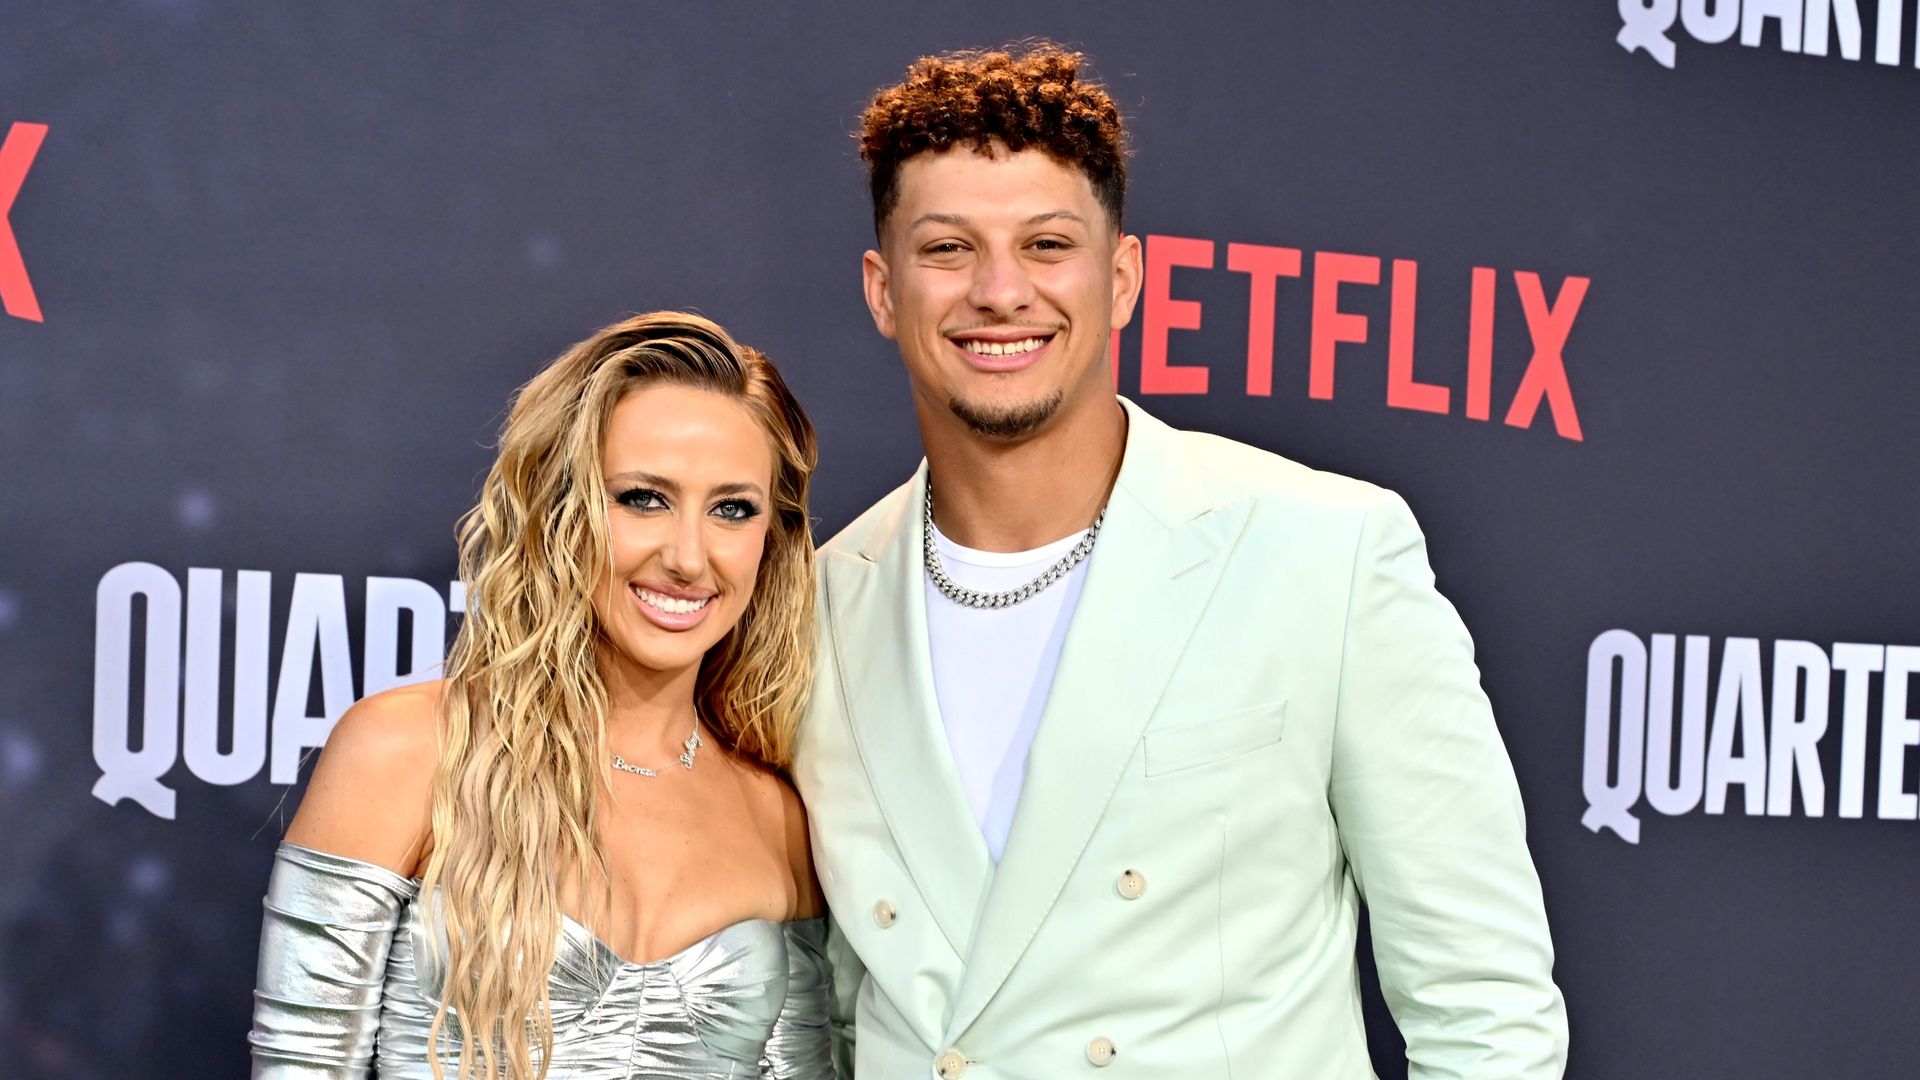 Patrick Mahomes' wife Brittany turns heads in cut-out red swimsuit ahead of Super Bowl 